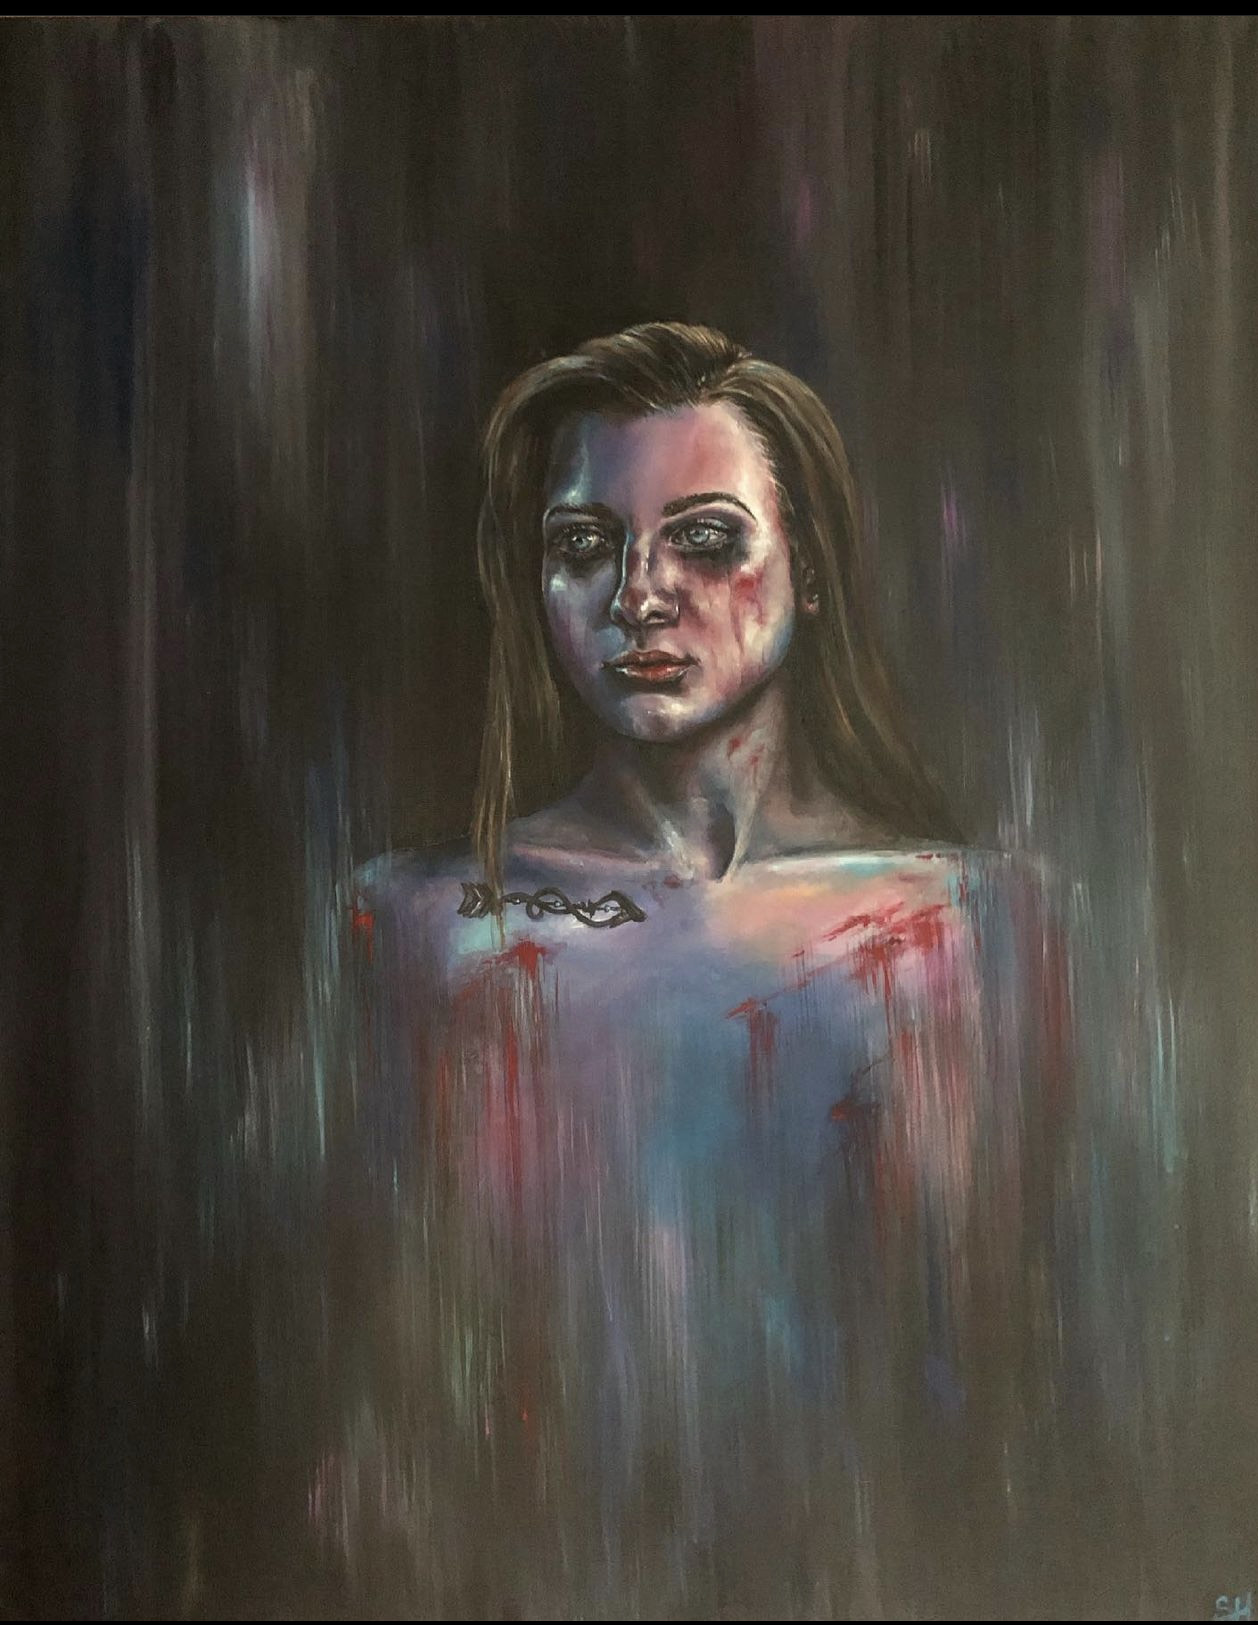 Self-portrait by Sarah Heil portraying resilience, vulnerability and overcoming trauma. 